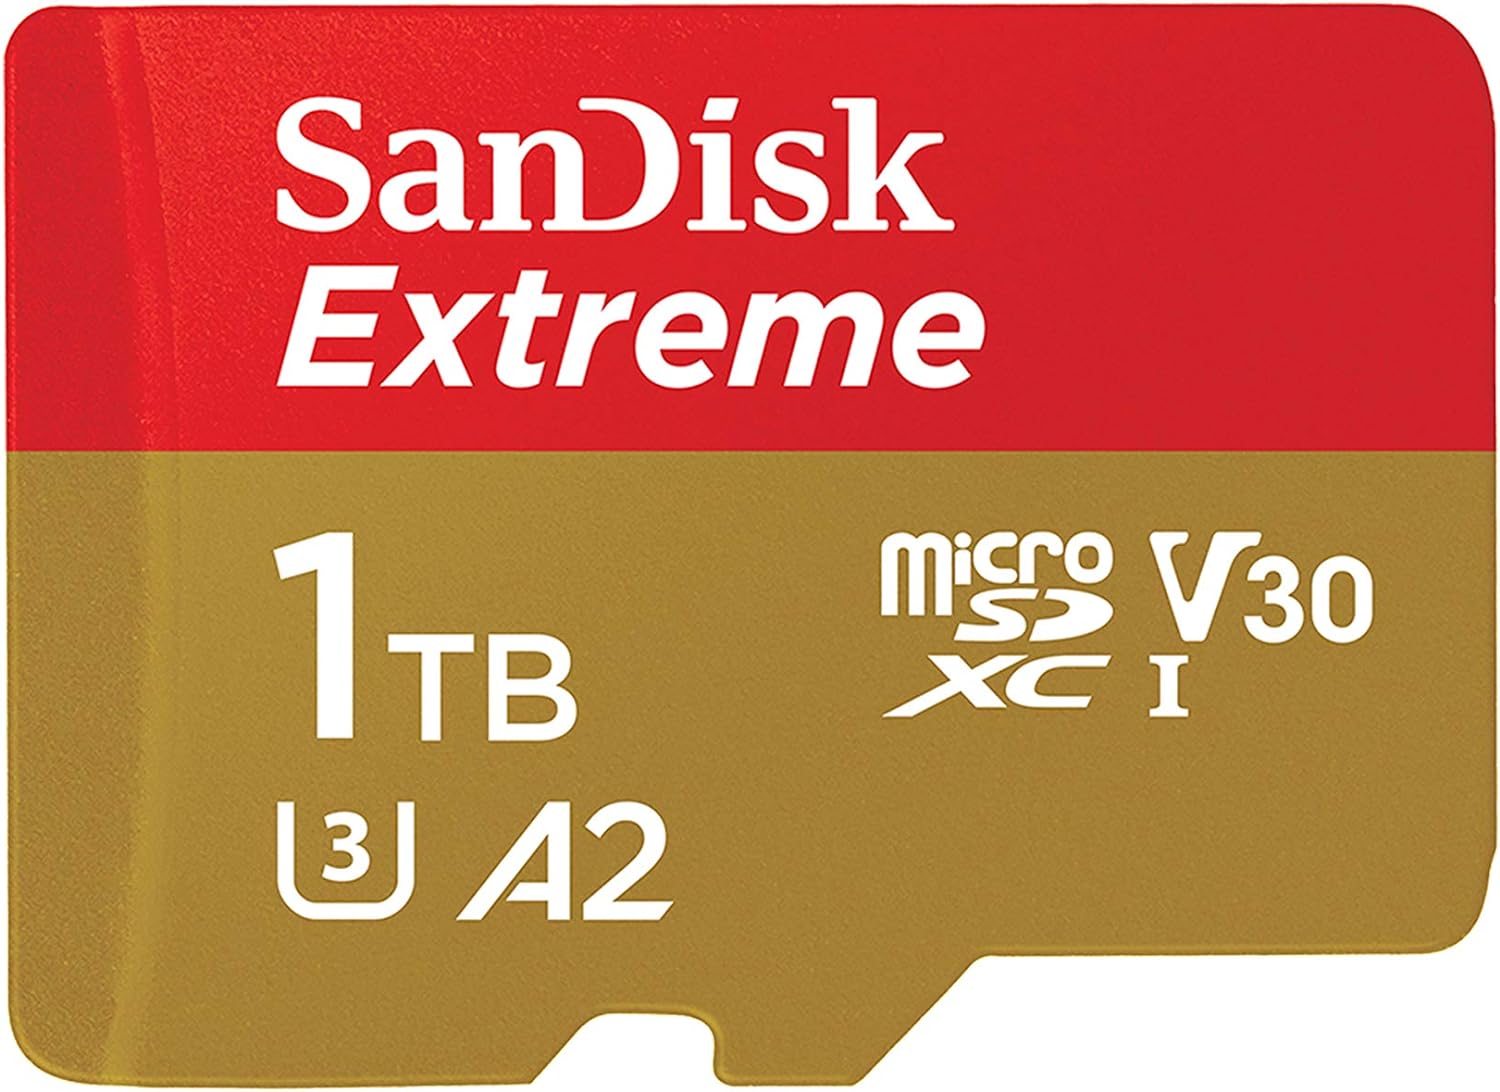 SanDisk Extreme 1 TB microSDXC Memory Card + SD Adapter with A2 App Performance + Rescue Pro Deluxe, Up to 160 MB:s, Class 10, UHS-I, U3, V30